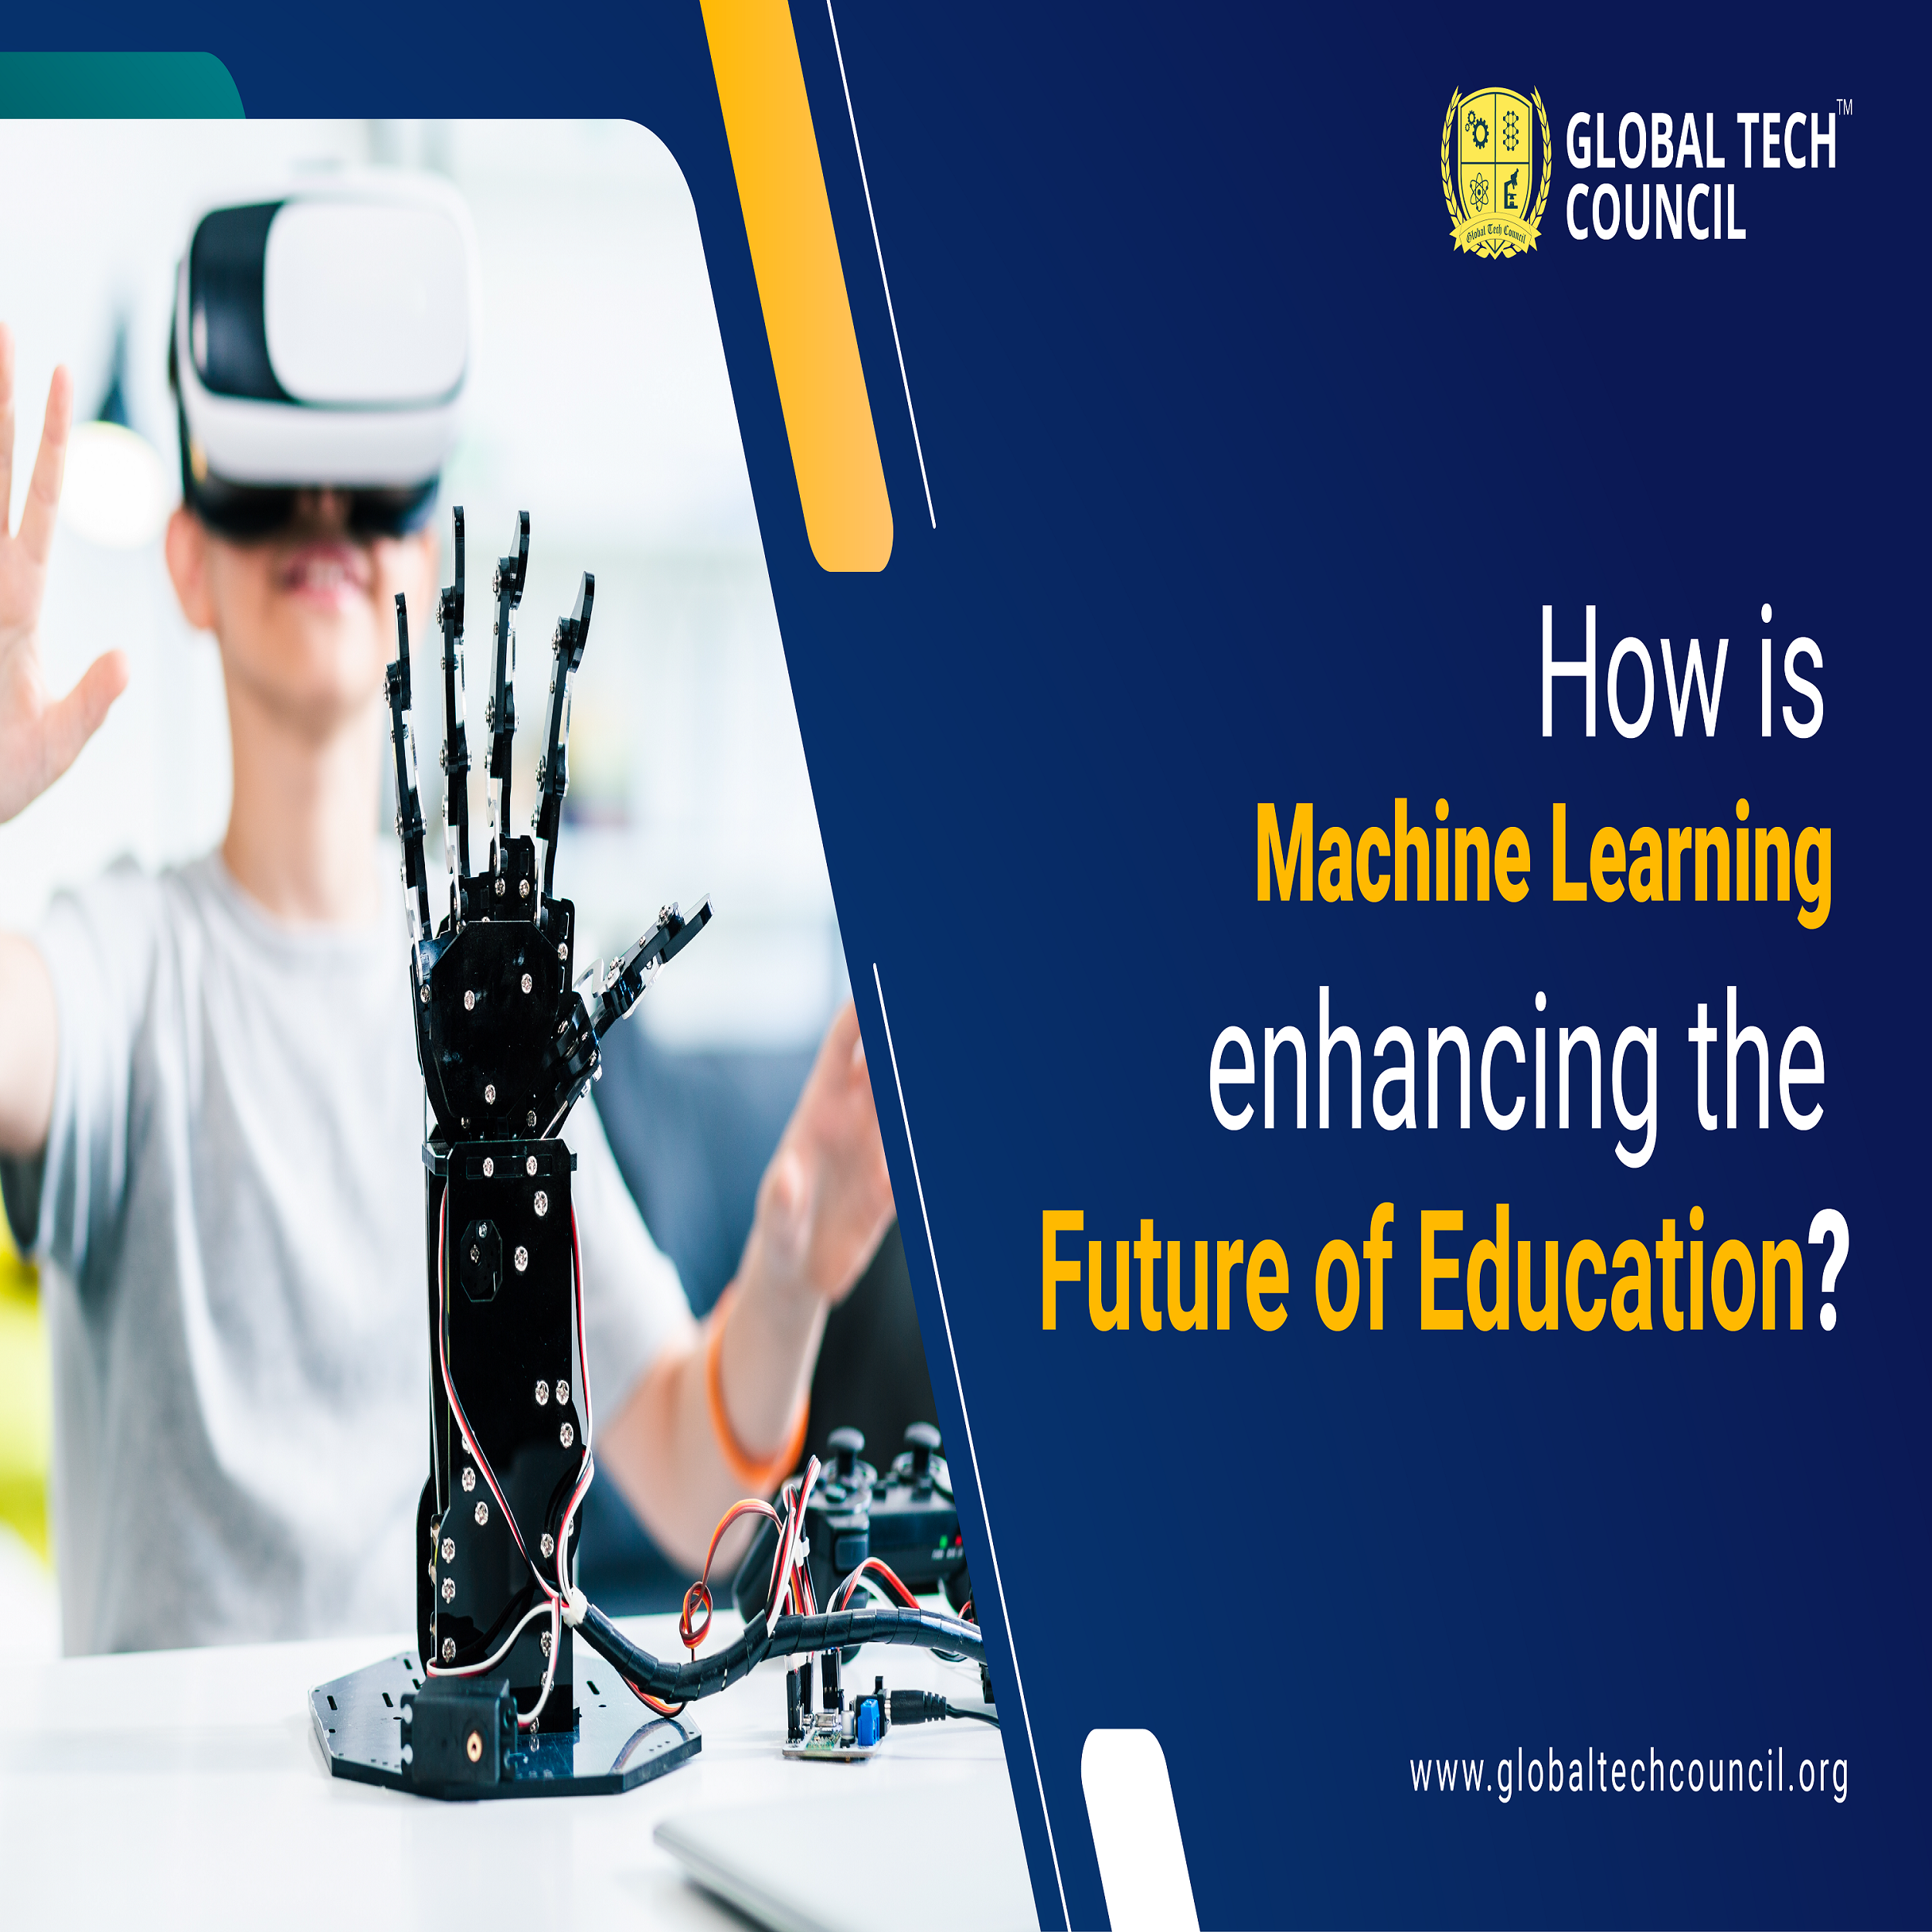 How is Machine Learning advancing the Future of the Educational sector?